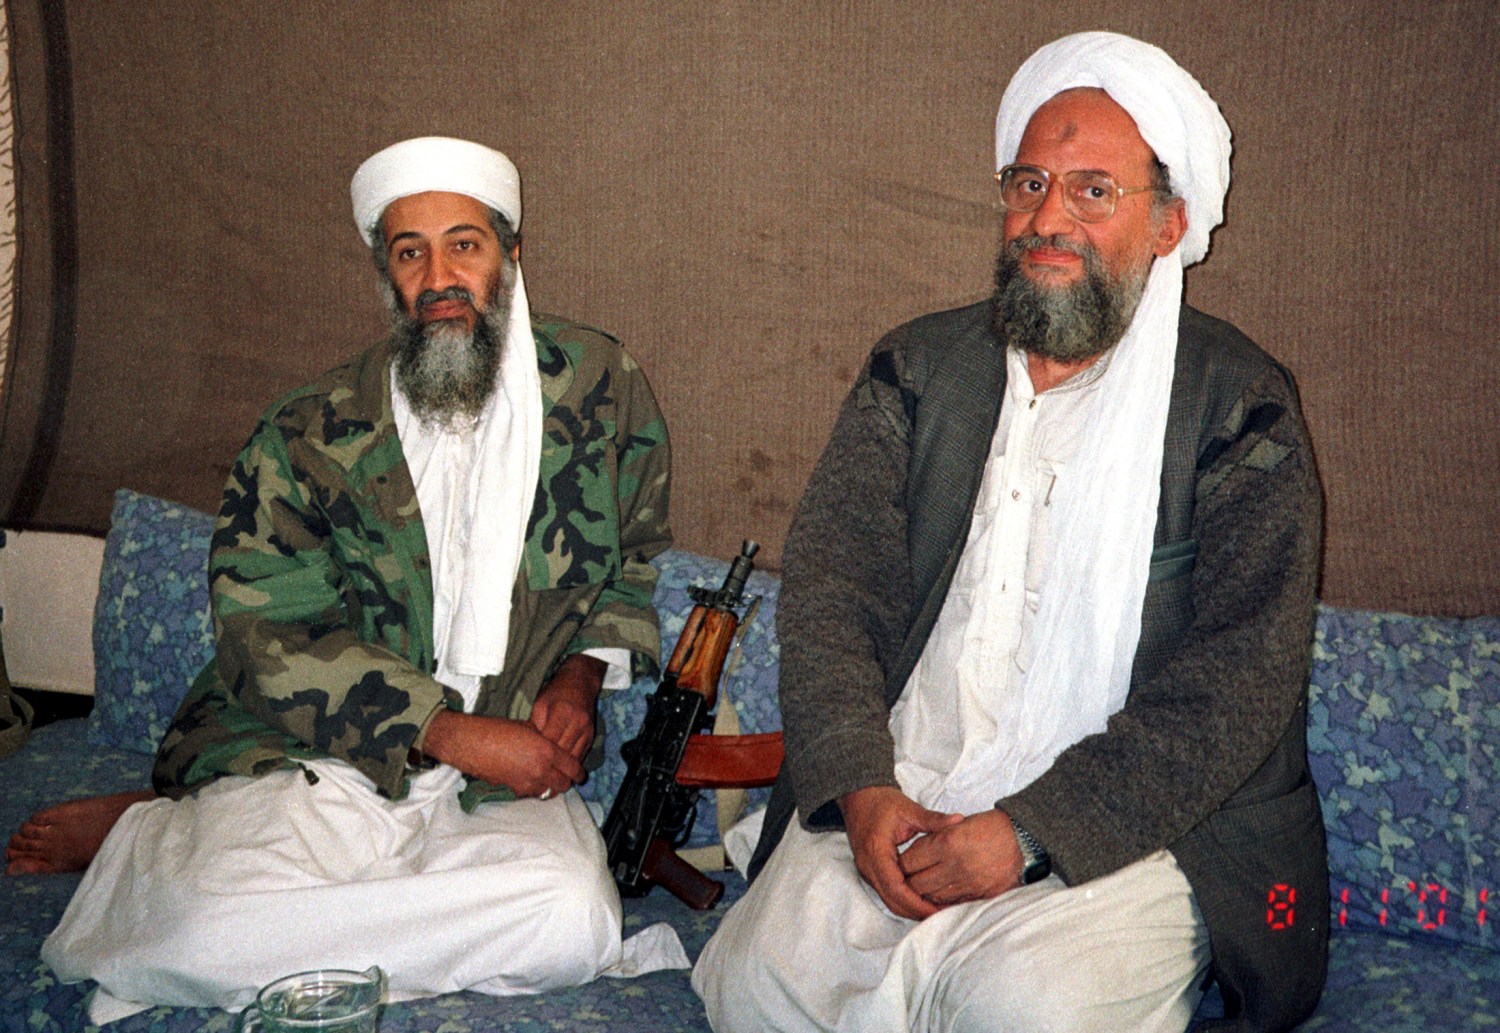 Osama bin Laden (L) sits with his adviser and purported successor Ayman al-Zawahri, an Egyptian linked to the al Qaeda network, during an interview with Pakistani journalist Hamid Mir (not pictured) in an image supplied by the respected Dawn newspaper November 10, 2001. Al Qaeda's elusive leader Osama bin Laden was killed in a mansion outside the Pakistani capital Islamabad, U.S. President Barack Obama said on May 1, 2011.   REUTERS/Hamid Mir/Editor/Ausaf Newspaper for Daily Dawn (AFGHANISTAN - Tags: POLITICS CONFLICT IMAGES OF THE DAY)